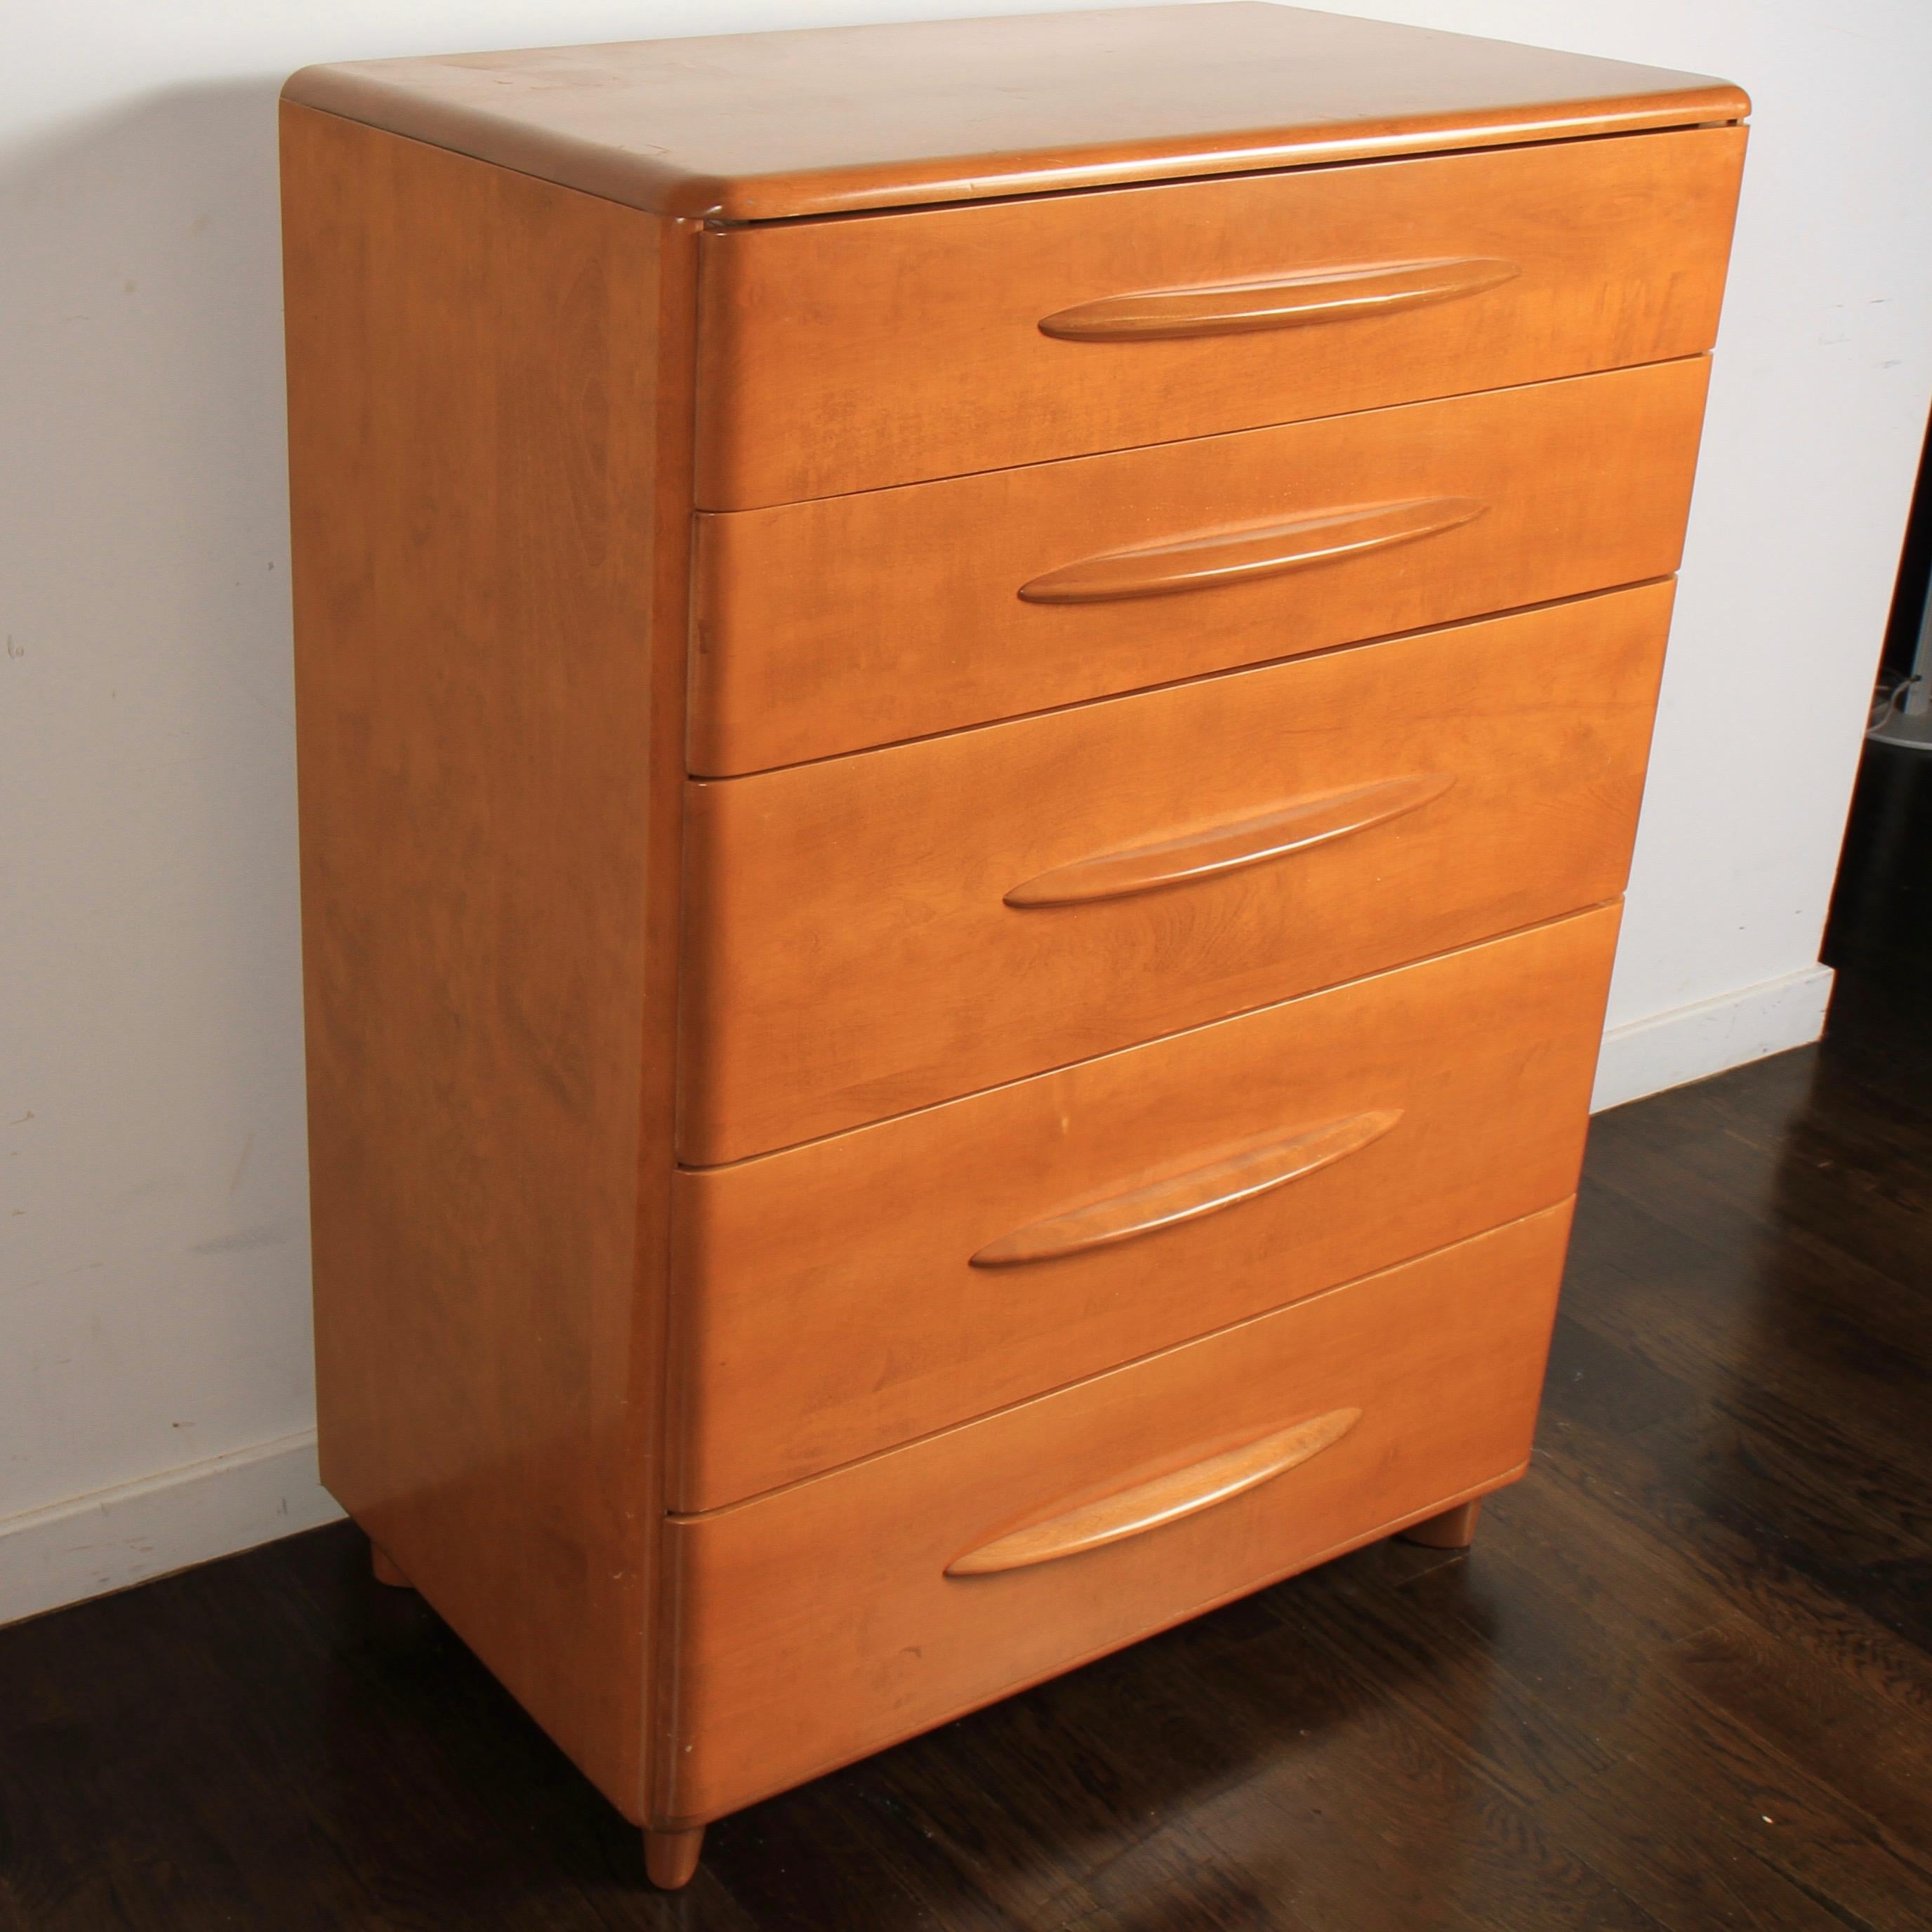 Clean, solid birch, five-drawer high dresser in original Champaign finish.

In 1897, two prominent furniture companies, Heywood Brothers (est. 1826) and Wakefield Company (est. 1855) merged to create Heywood Brothers & Wakefield Company; the name